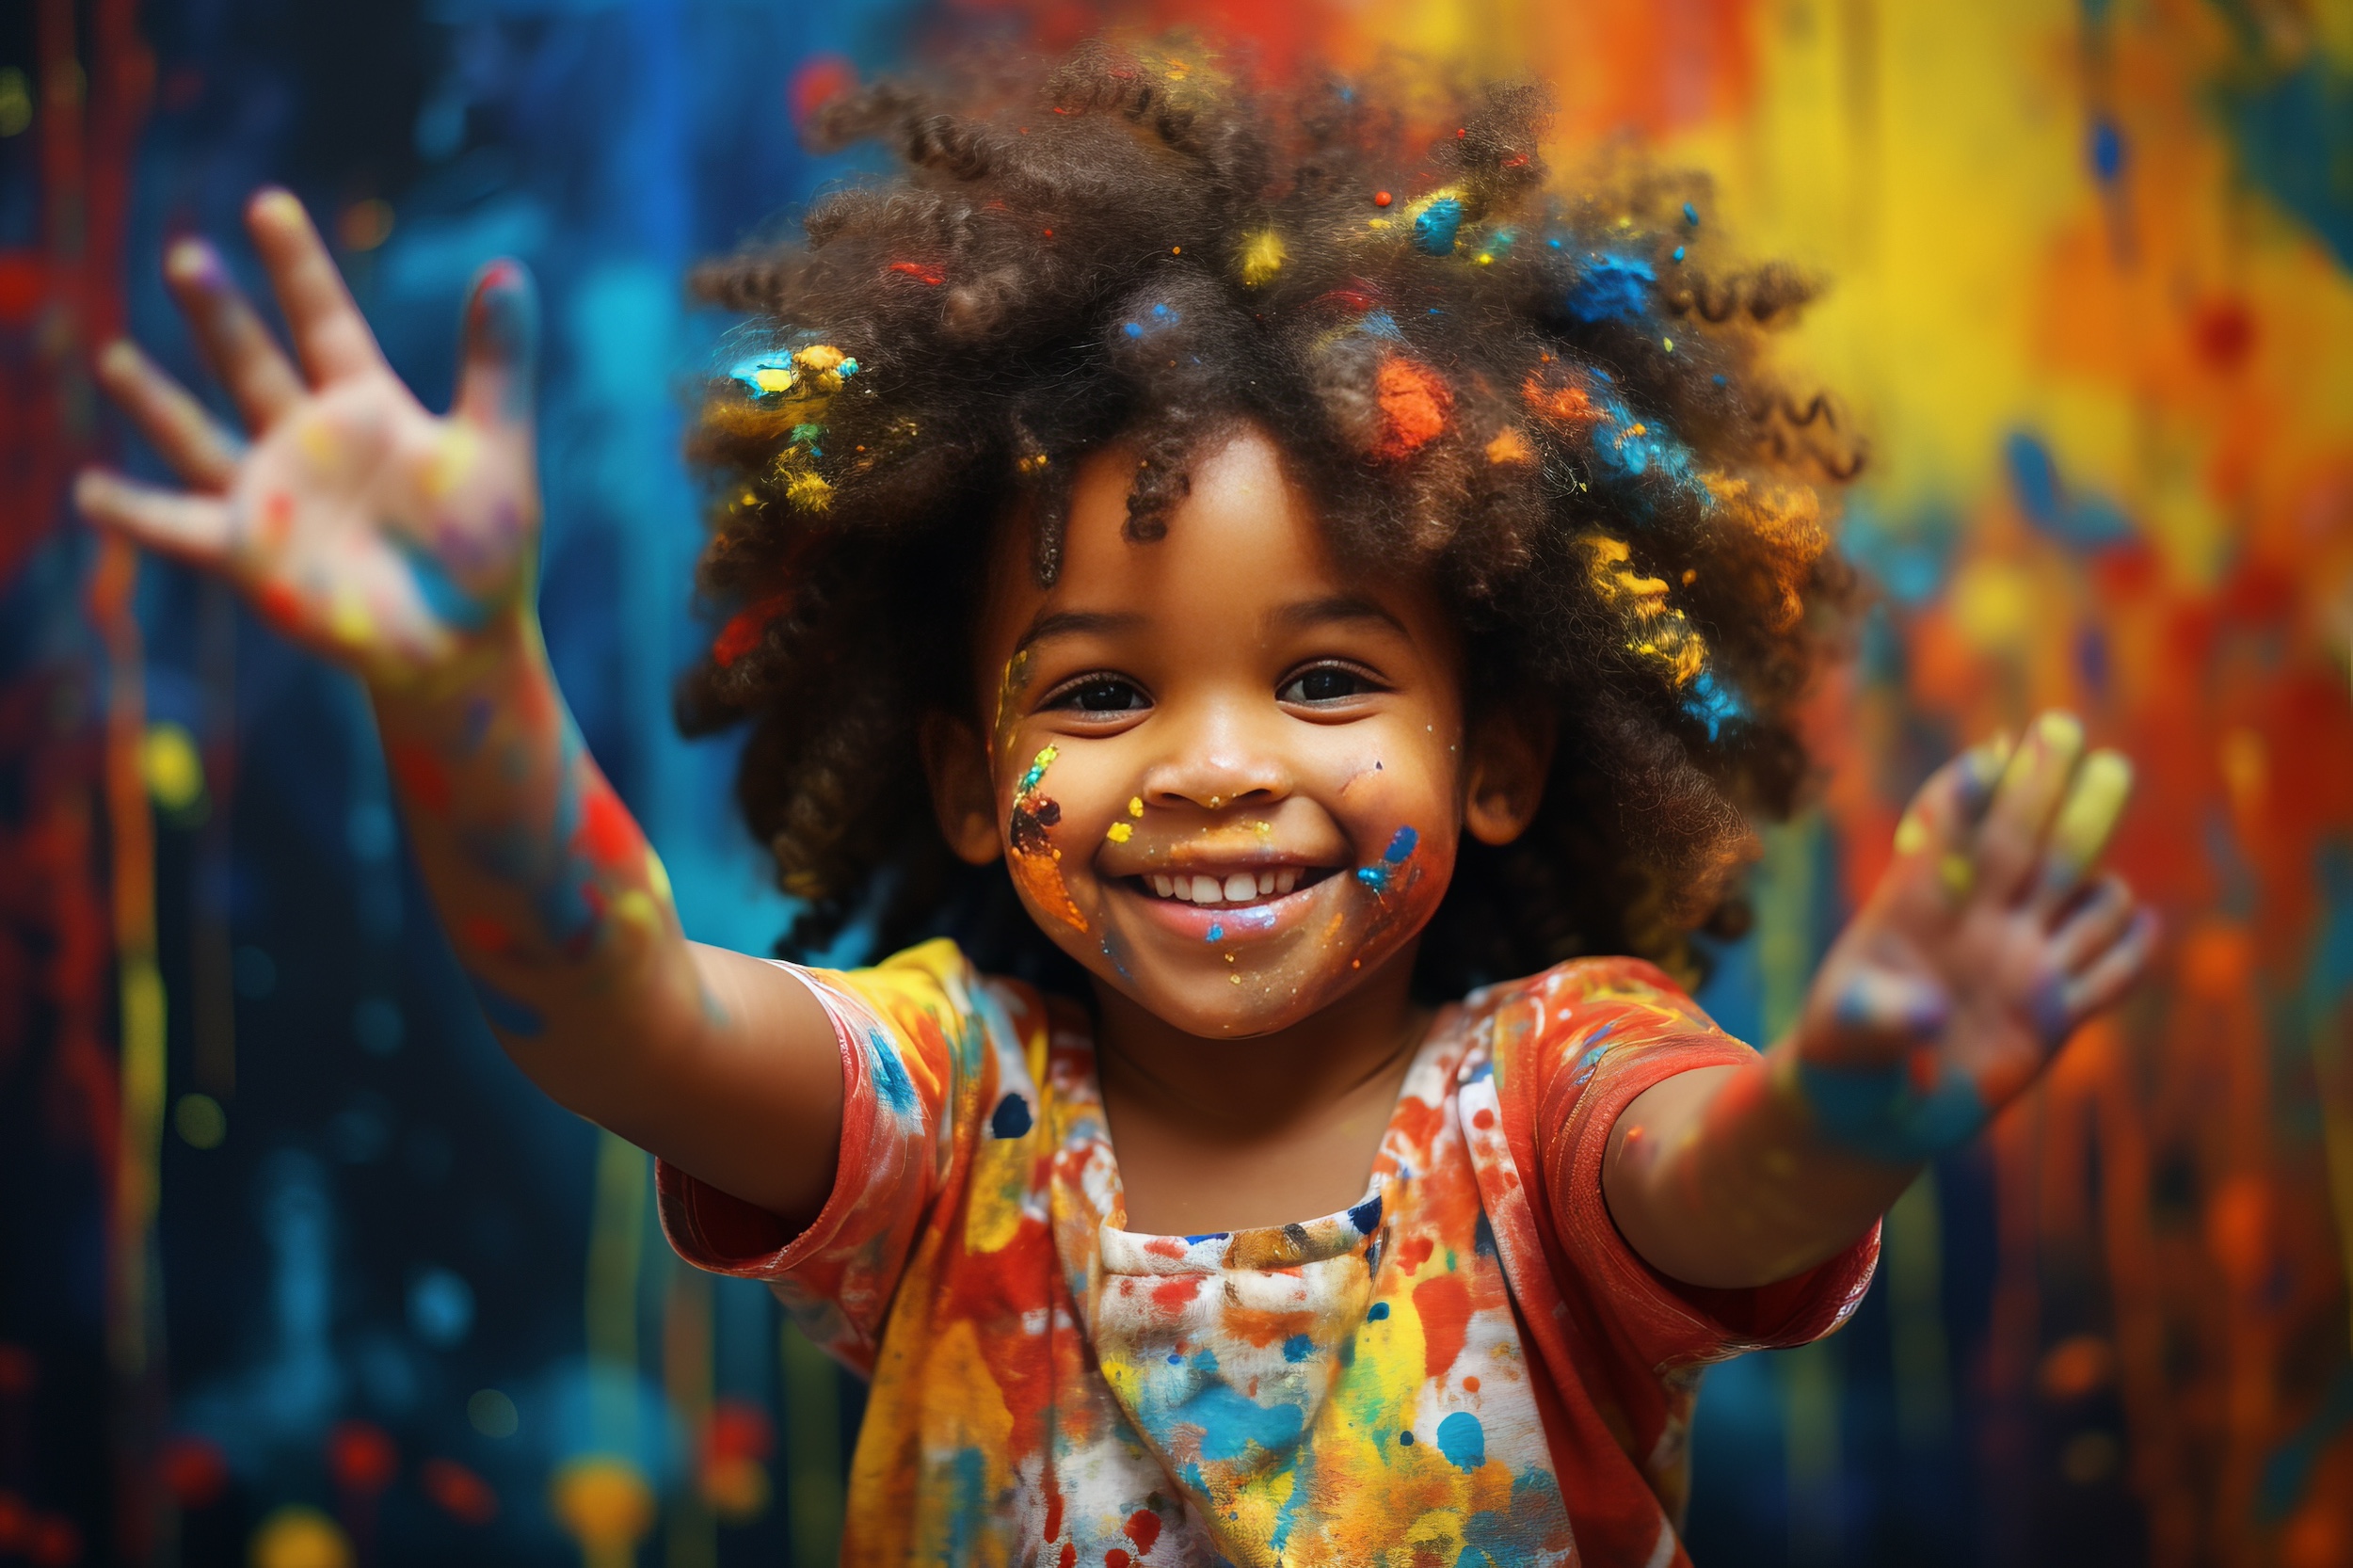 An african american girl about age 3 is enjoying finger painting but she has it all over her and the walls making a beautiful multicolor photograph.